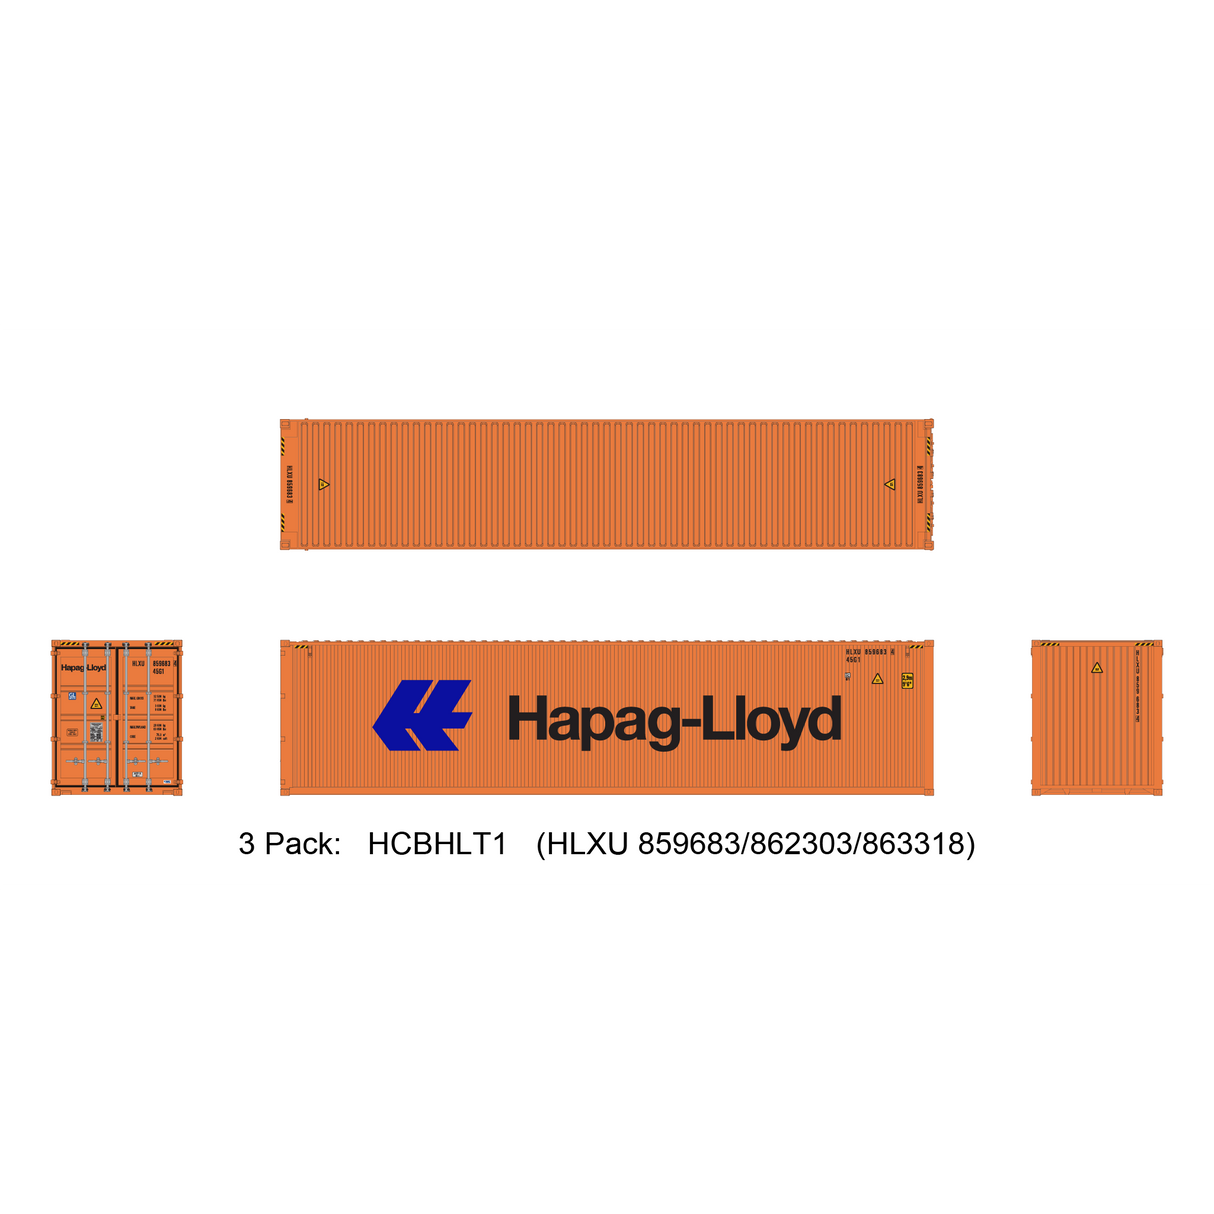 Aurora Miniatures HO 40ft Containers 3 Pack Hapag-Lloyd Large Logo (HLXU 859683/862303/863318) - Fusion Scale Hobbies